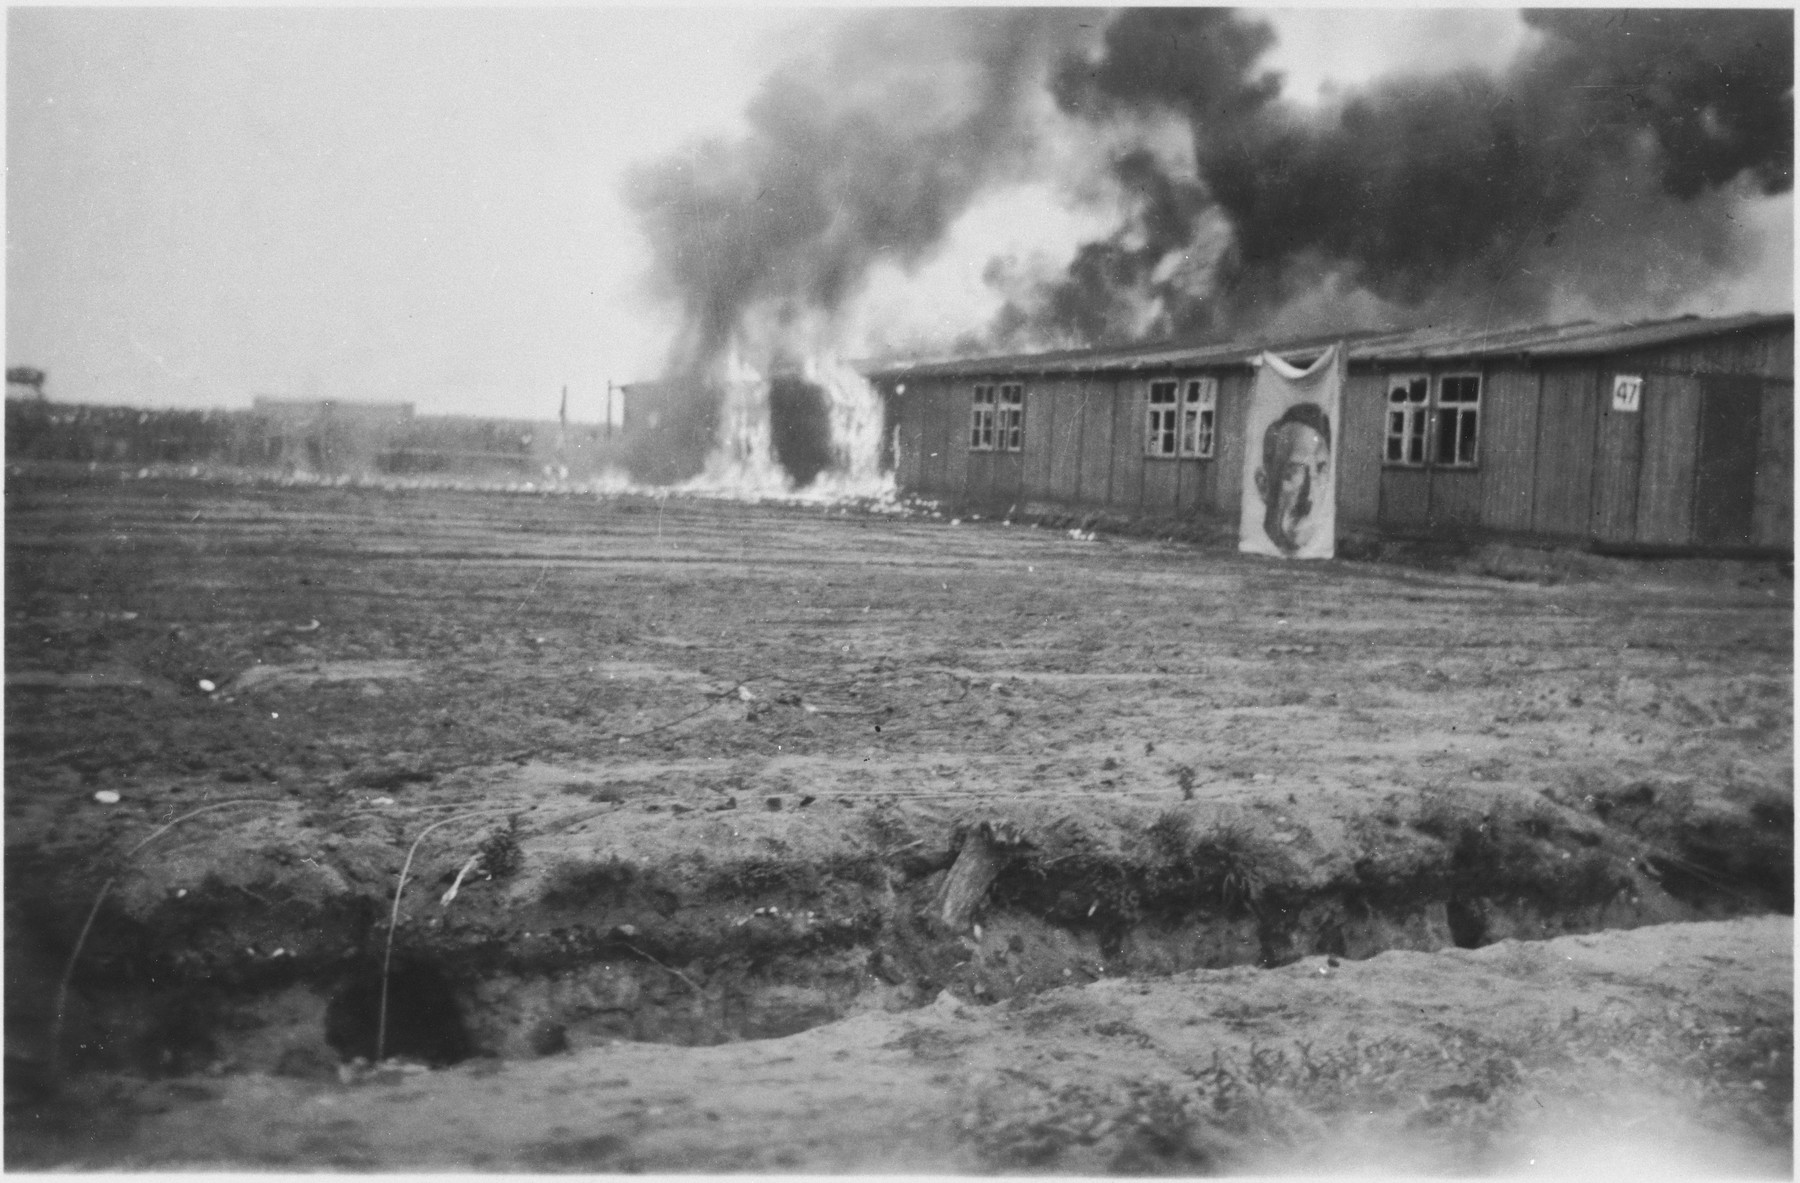 Fire consumes a barracks in the Bergen-Belsen concentration camp decorated with a wall size portrait of Adolf Hitler.  

The barracks were burned to control the spread of epidemics.